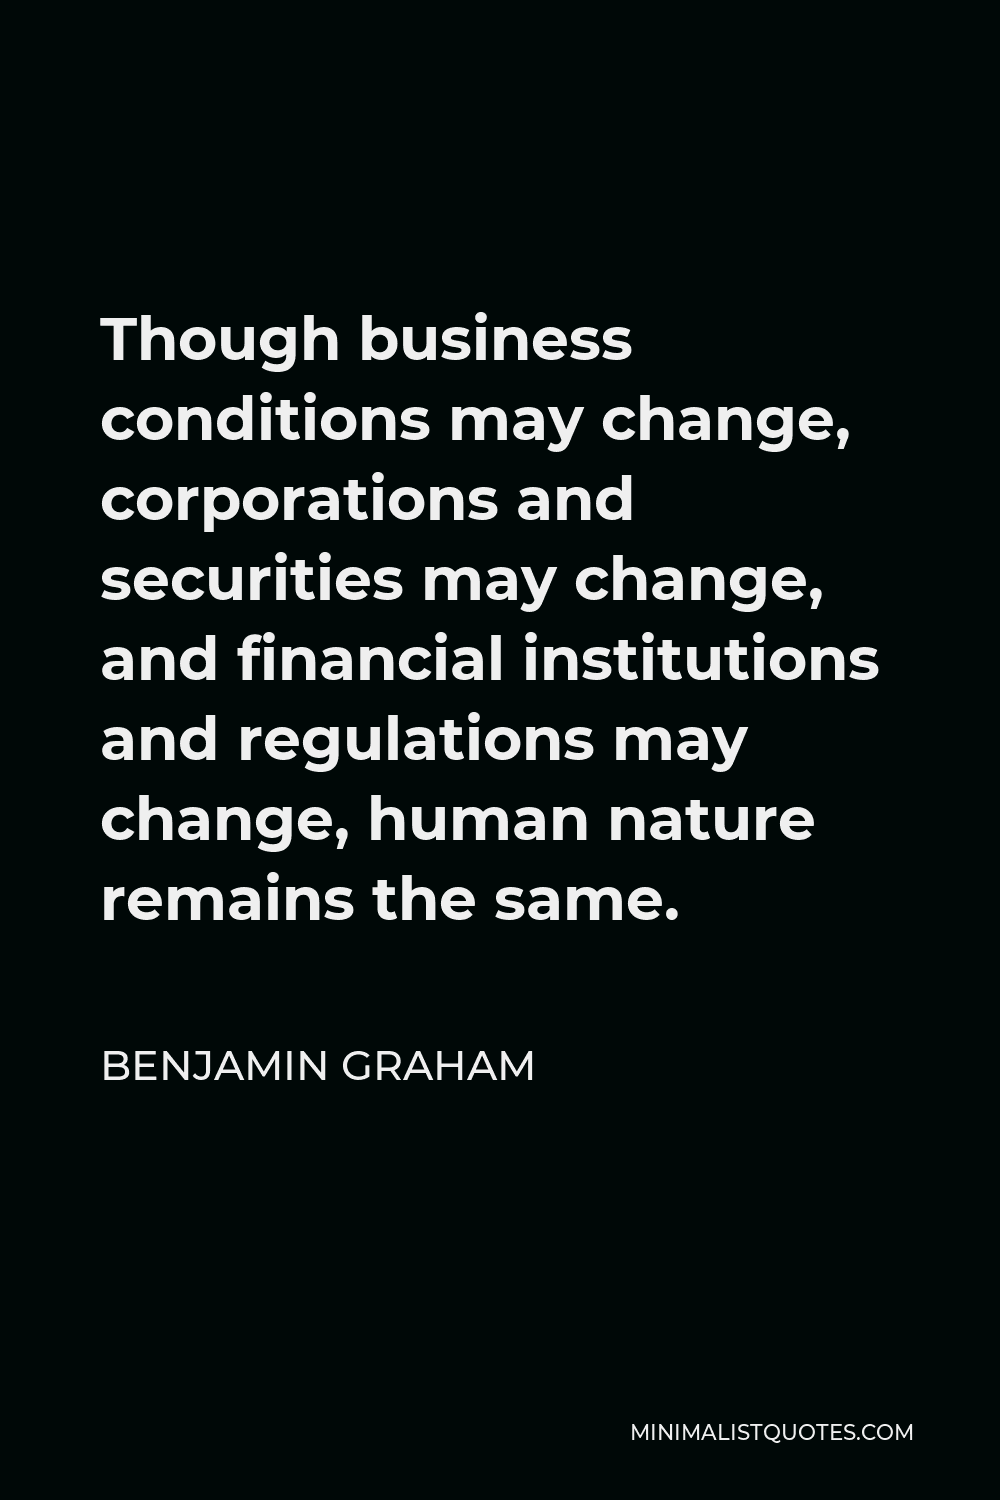 Benjamin Graham Quote - Though business conditions may change, corporations and securities may change, and financial institutions and regulations may change, human nature remains the same.